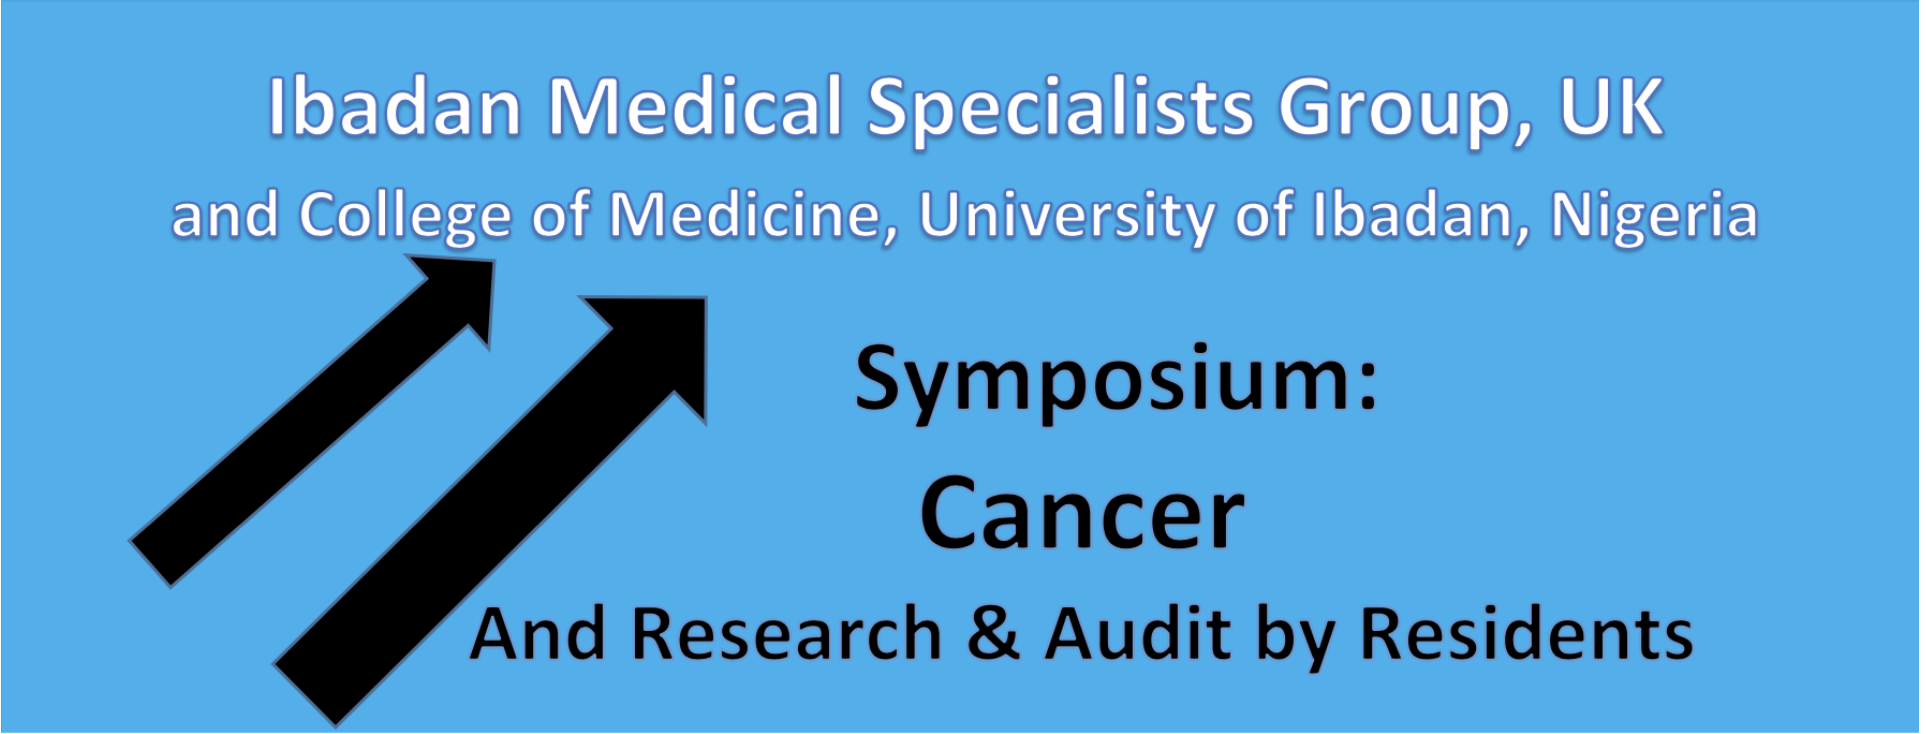 You are currently viewing Symposium Cancer & Research & Audit by Residents